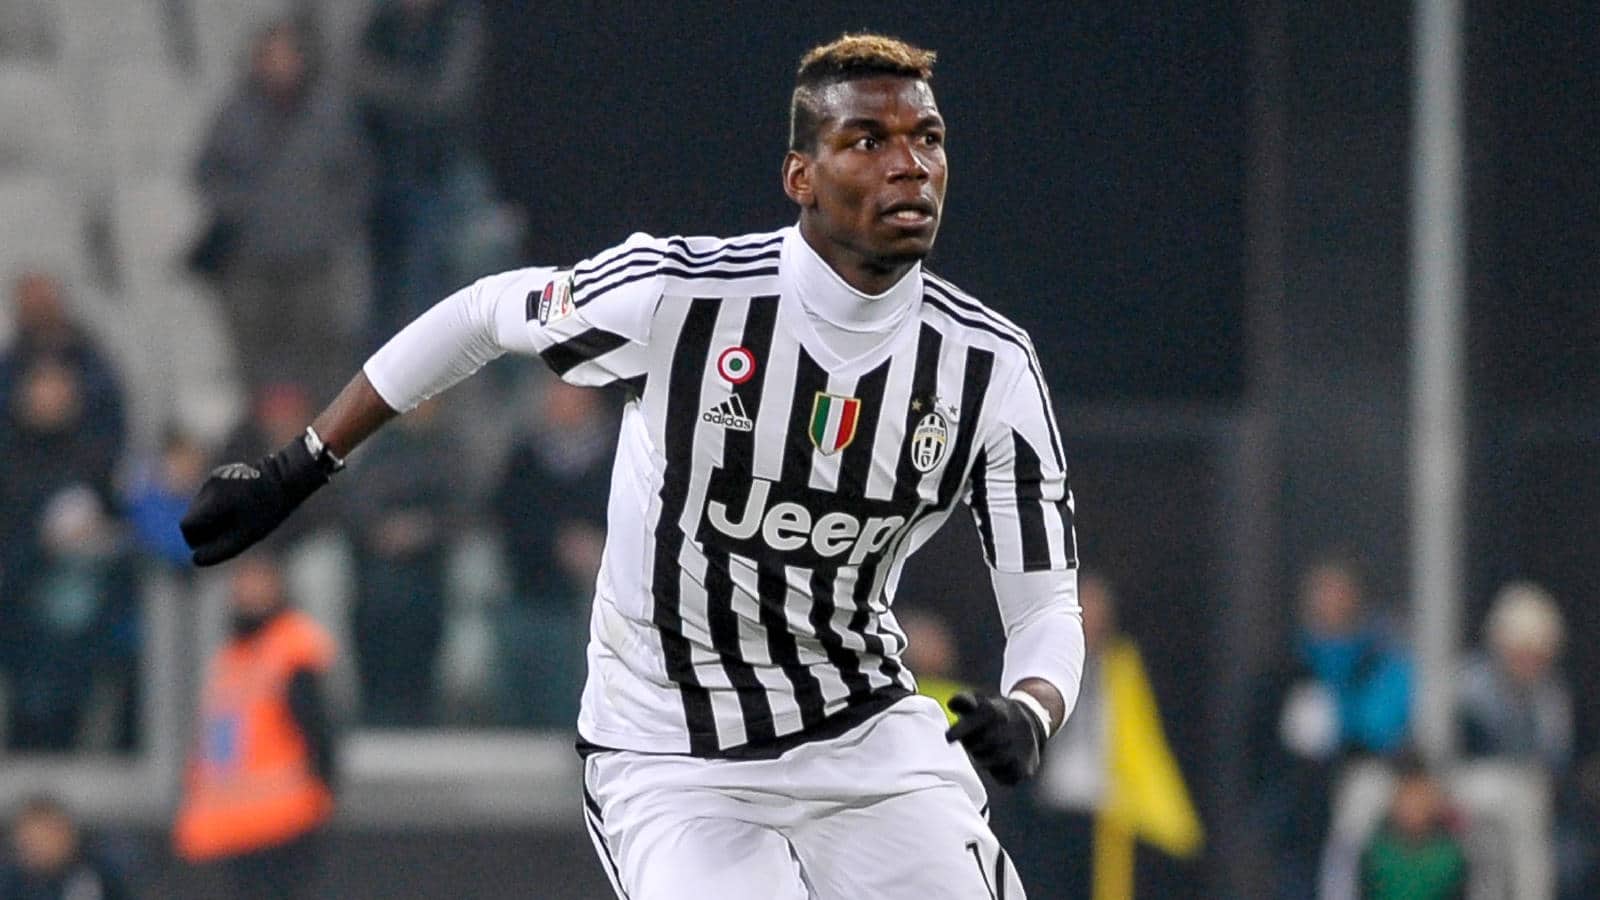 Pogba To Undergo Knee Surgery, May Miss World Cup In Qatar